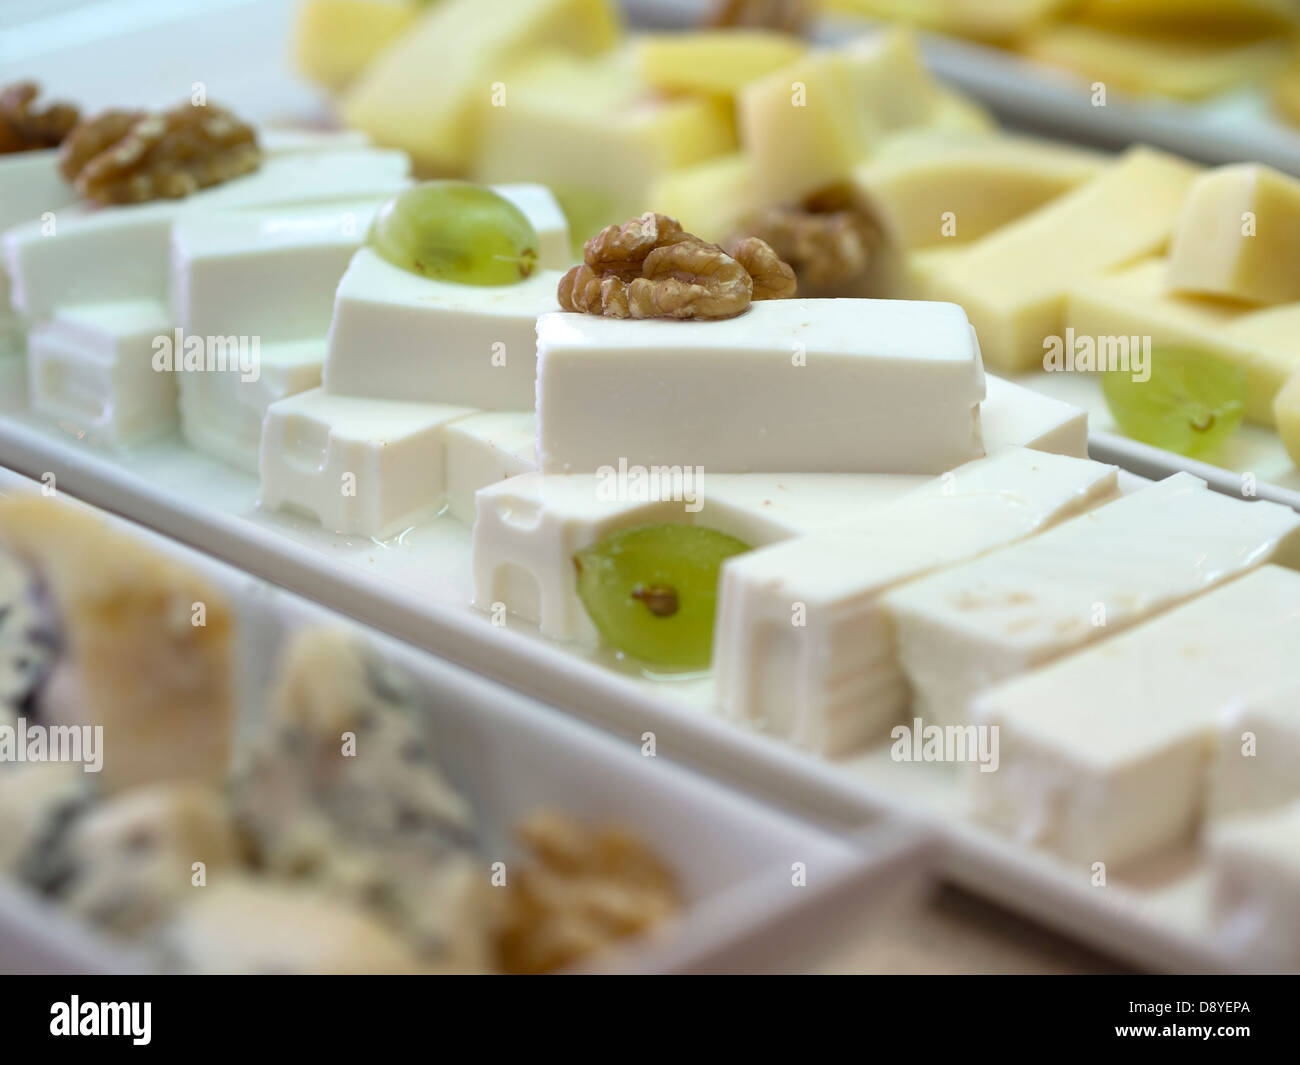 Cheese selection at hotel breakfast buffet table Stock Photo